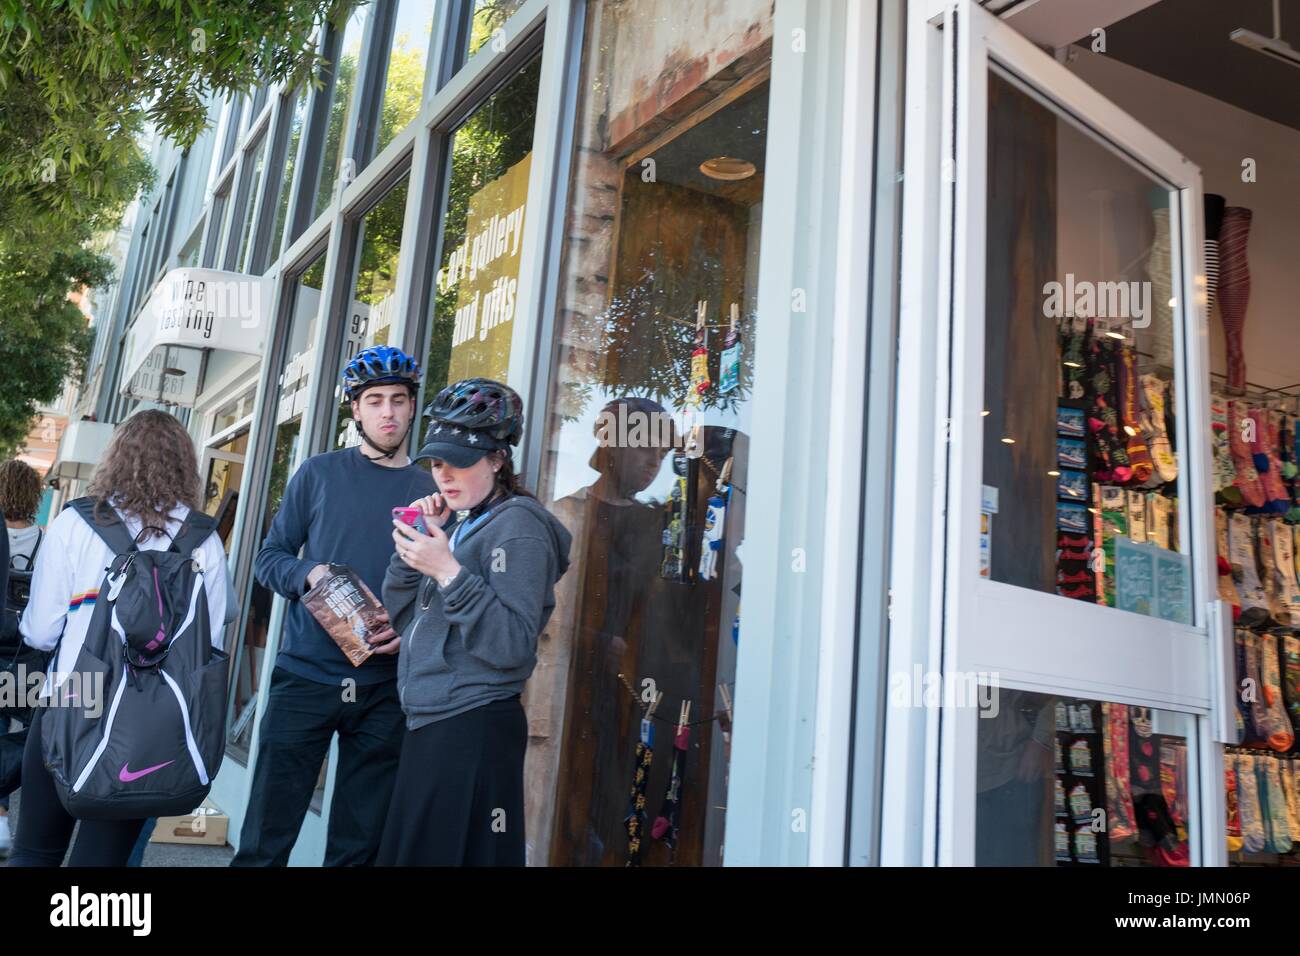 Two Millennial age cyclists wearing helmets stand outside a store on Bridgeway road in downtown Sausalito, California, June 29, 2017. Stock Photo